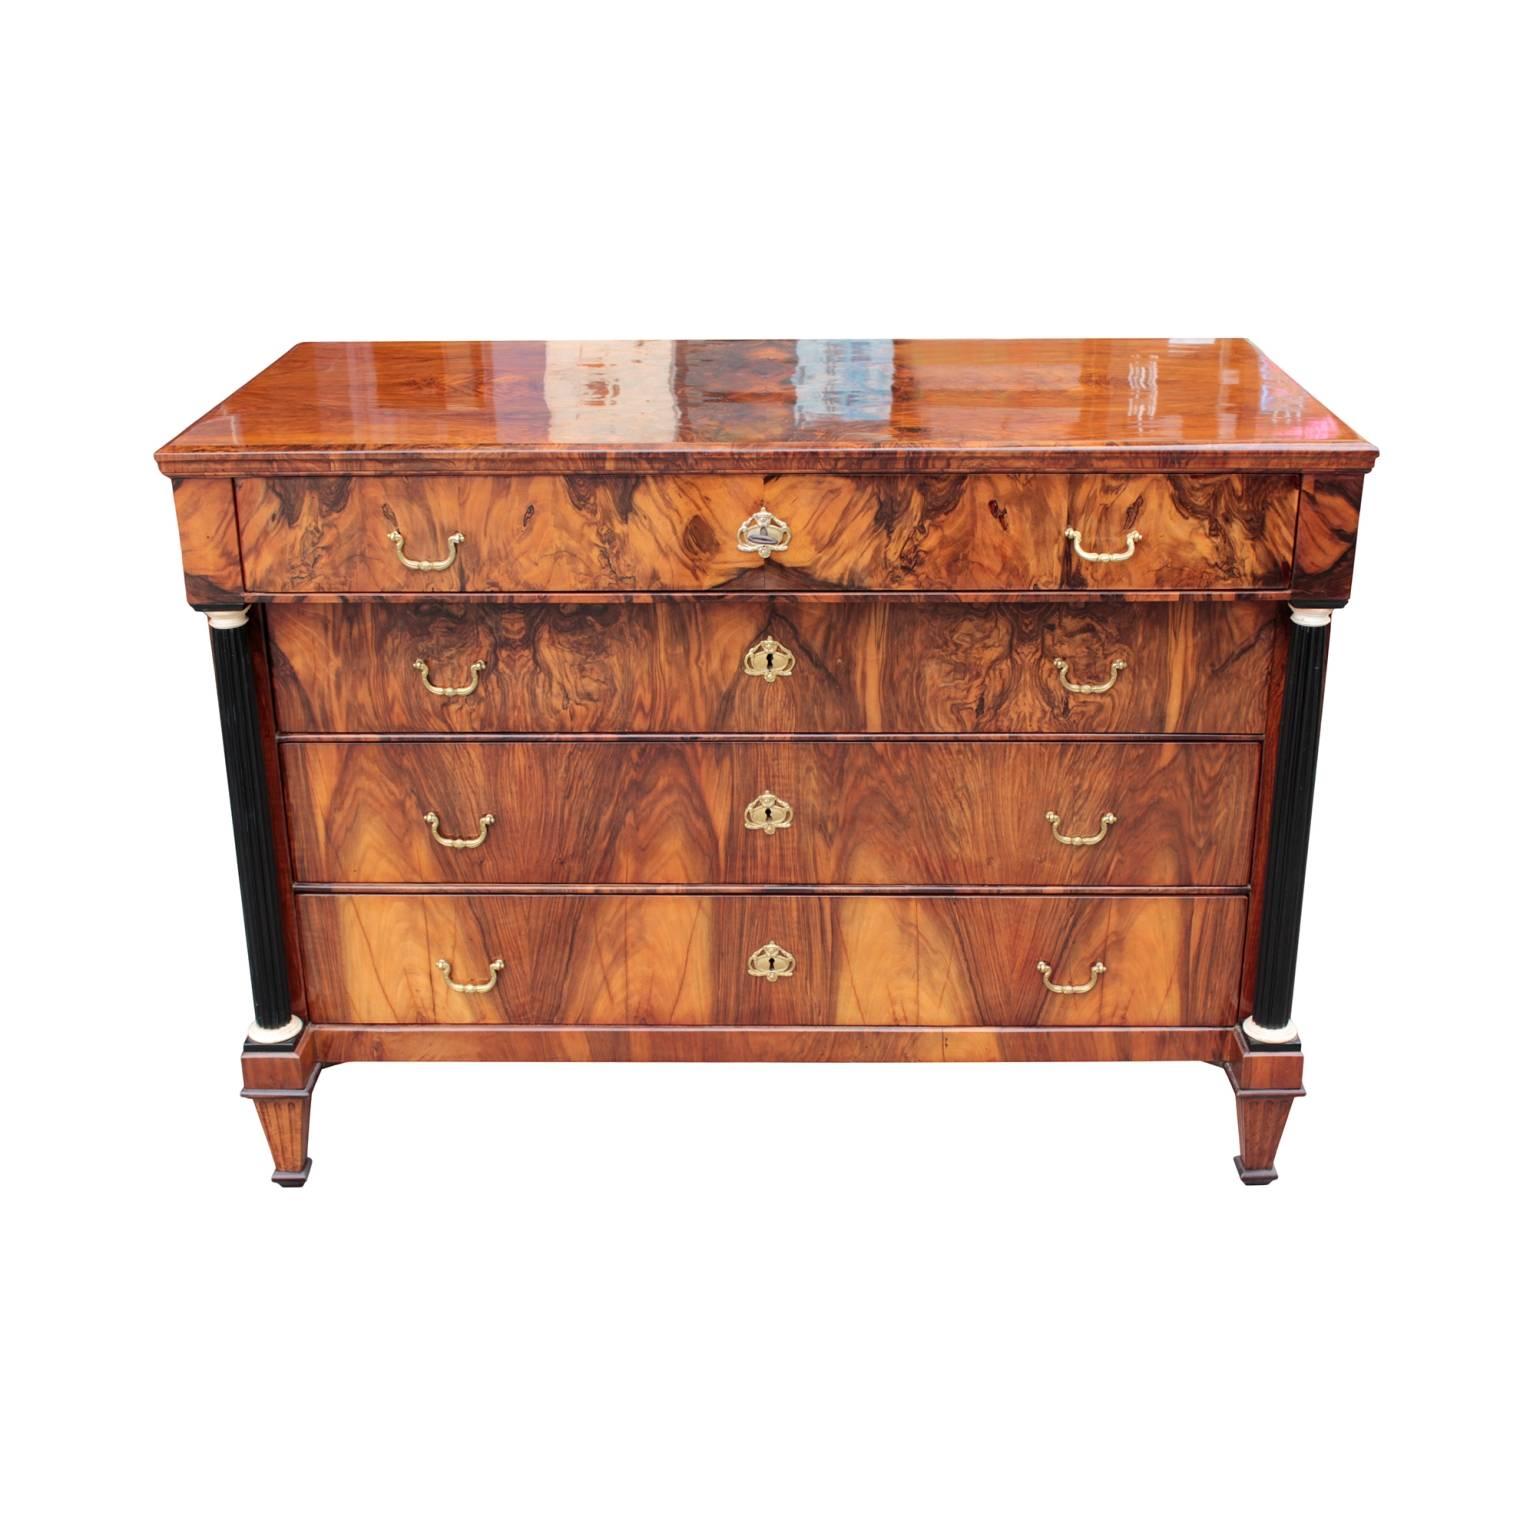 Very fine North Italian neoclassical (Biedermeier period) chest having a frieze drawer on top of three drawers, all fitted with brass urn escutcheons and pulls and flanked by a pair of free-standing ebonized fluted columns with bone capitals and